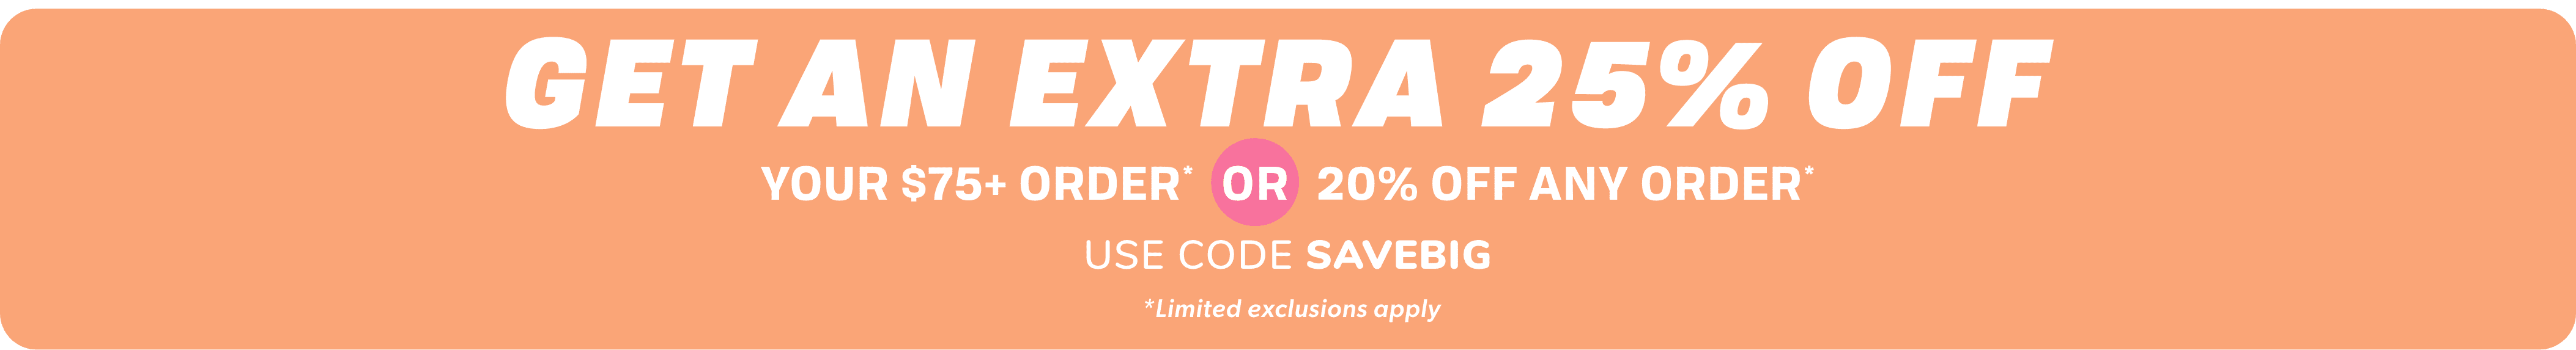 Extra 25% Off Your $75+ order* or 20% OFF Any order* with code SAVEBIG